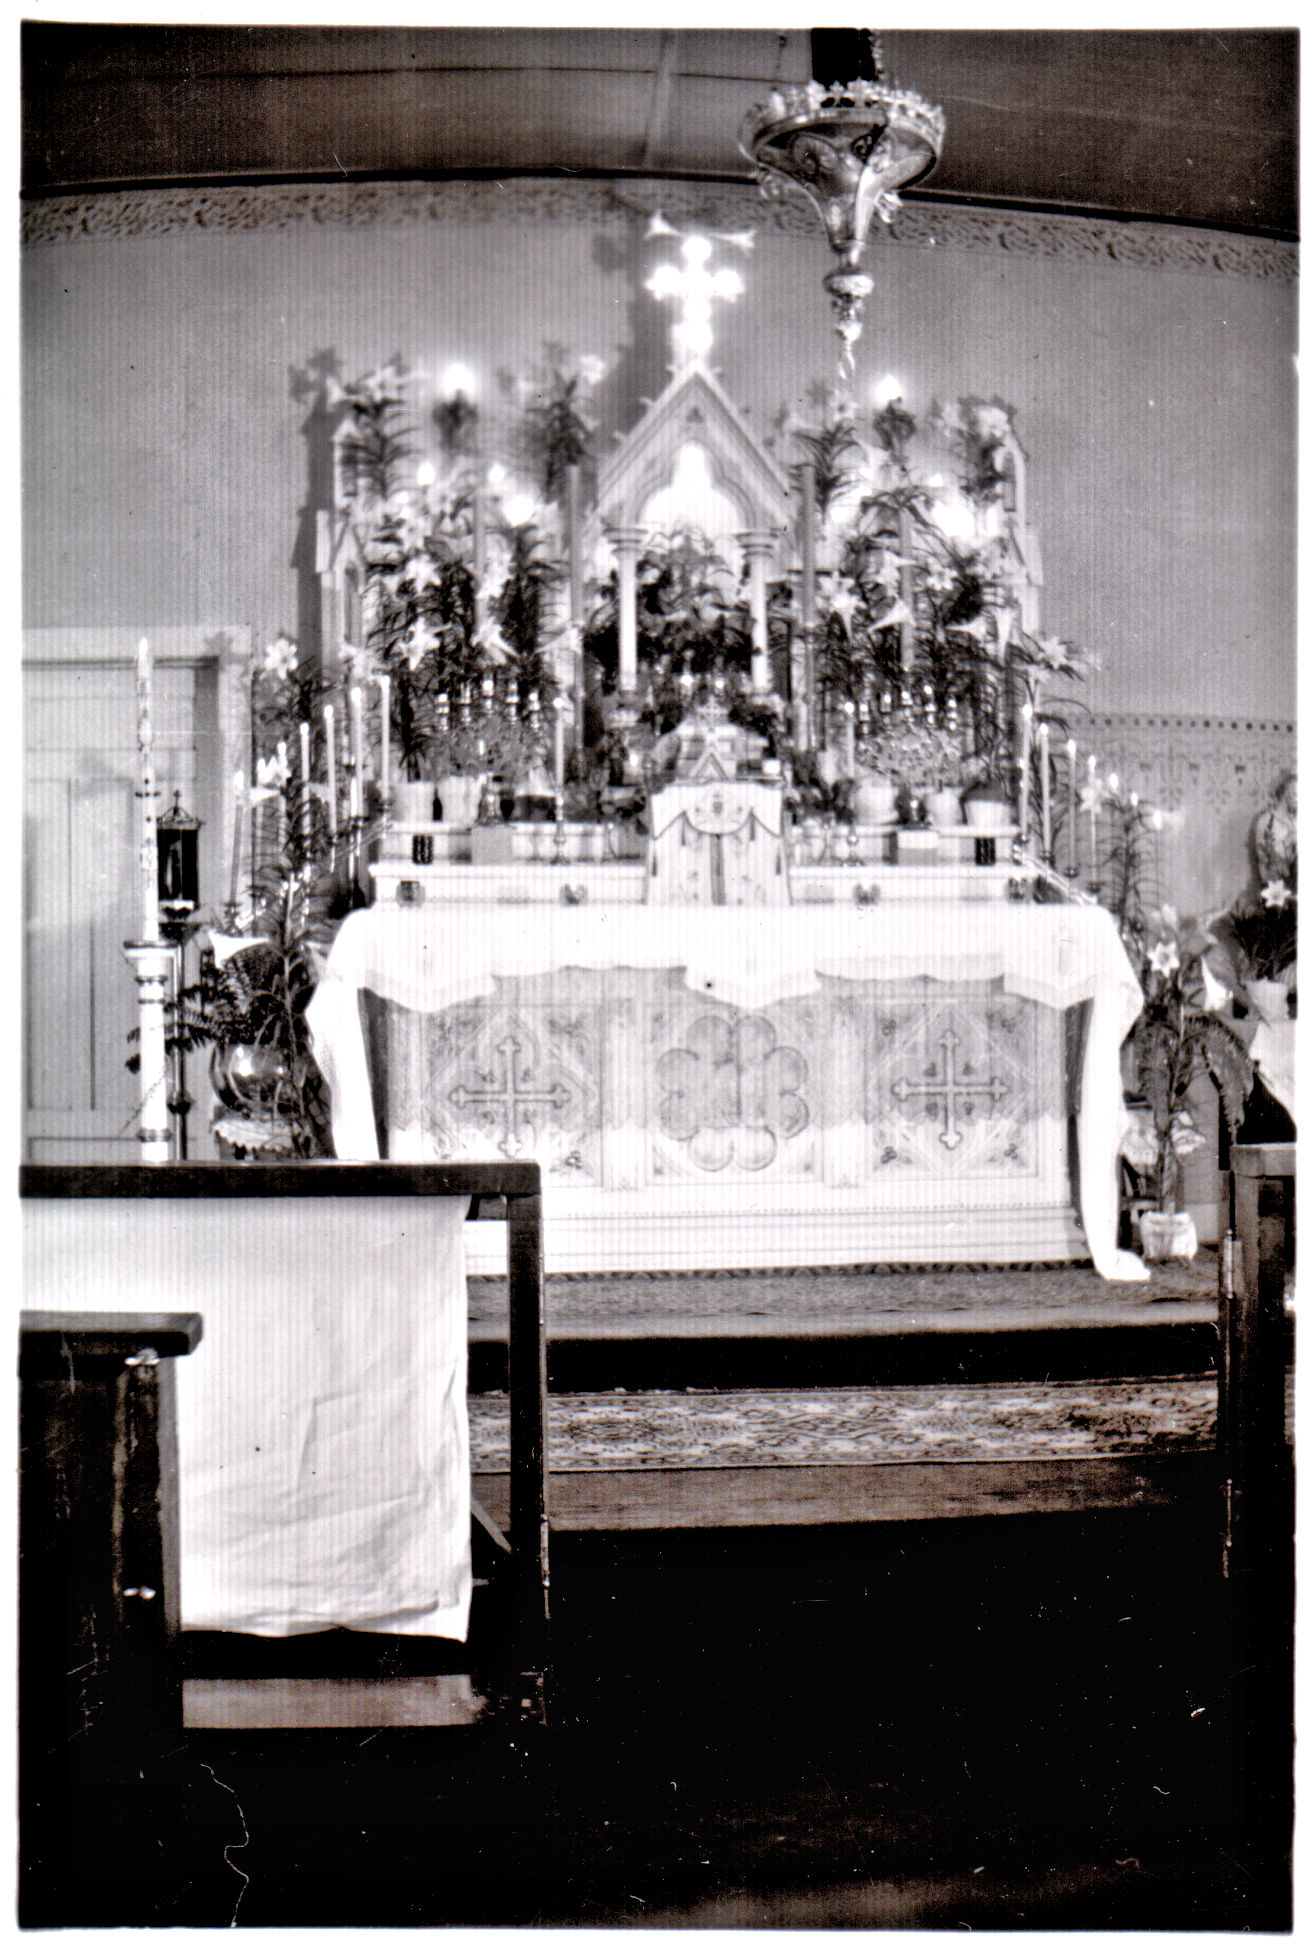 Photo of the main altar in the original church decorated for Easter